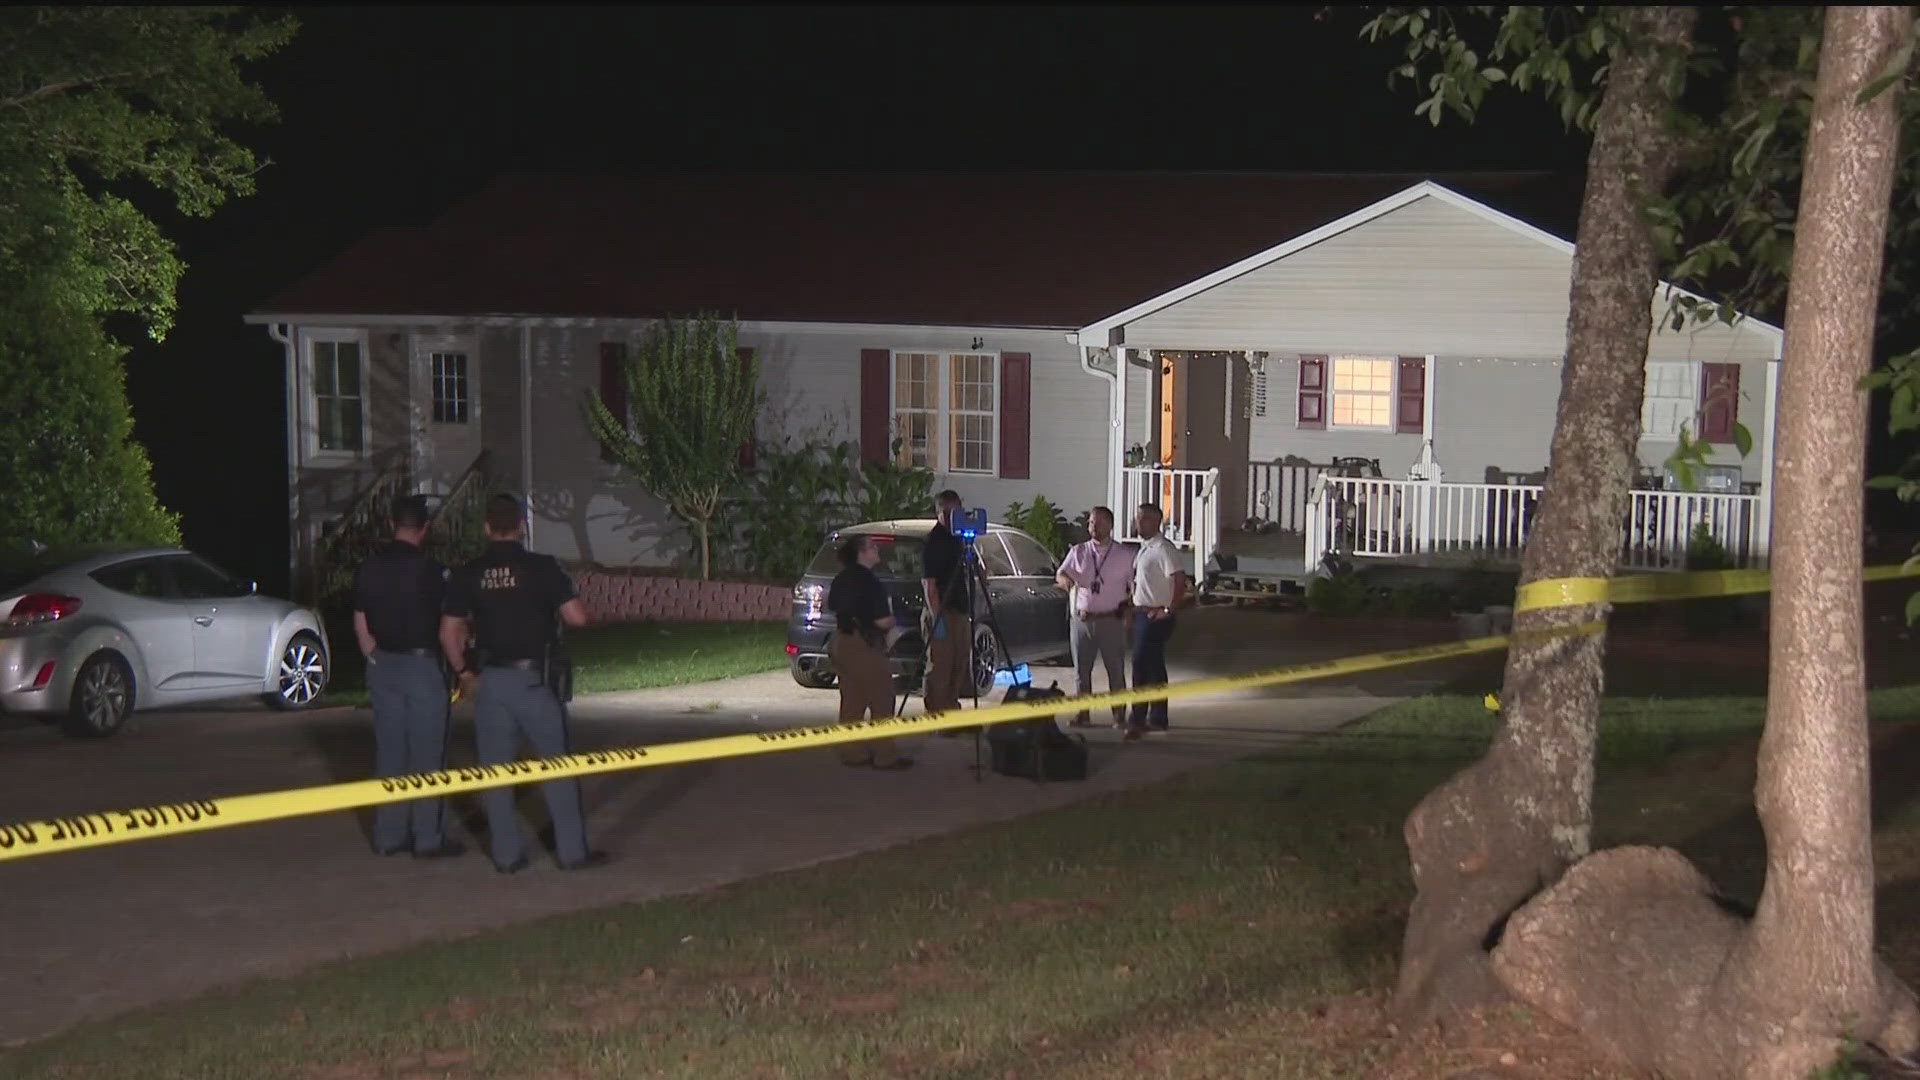 A 2-year-old boy died after being inside a car for too long outside of the home in unincorporated Cobb County on Tuesday evening, police said.